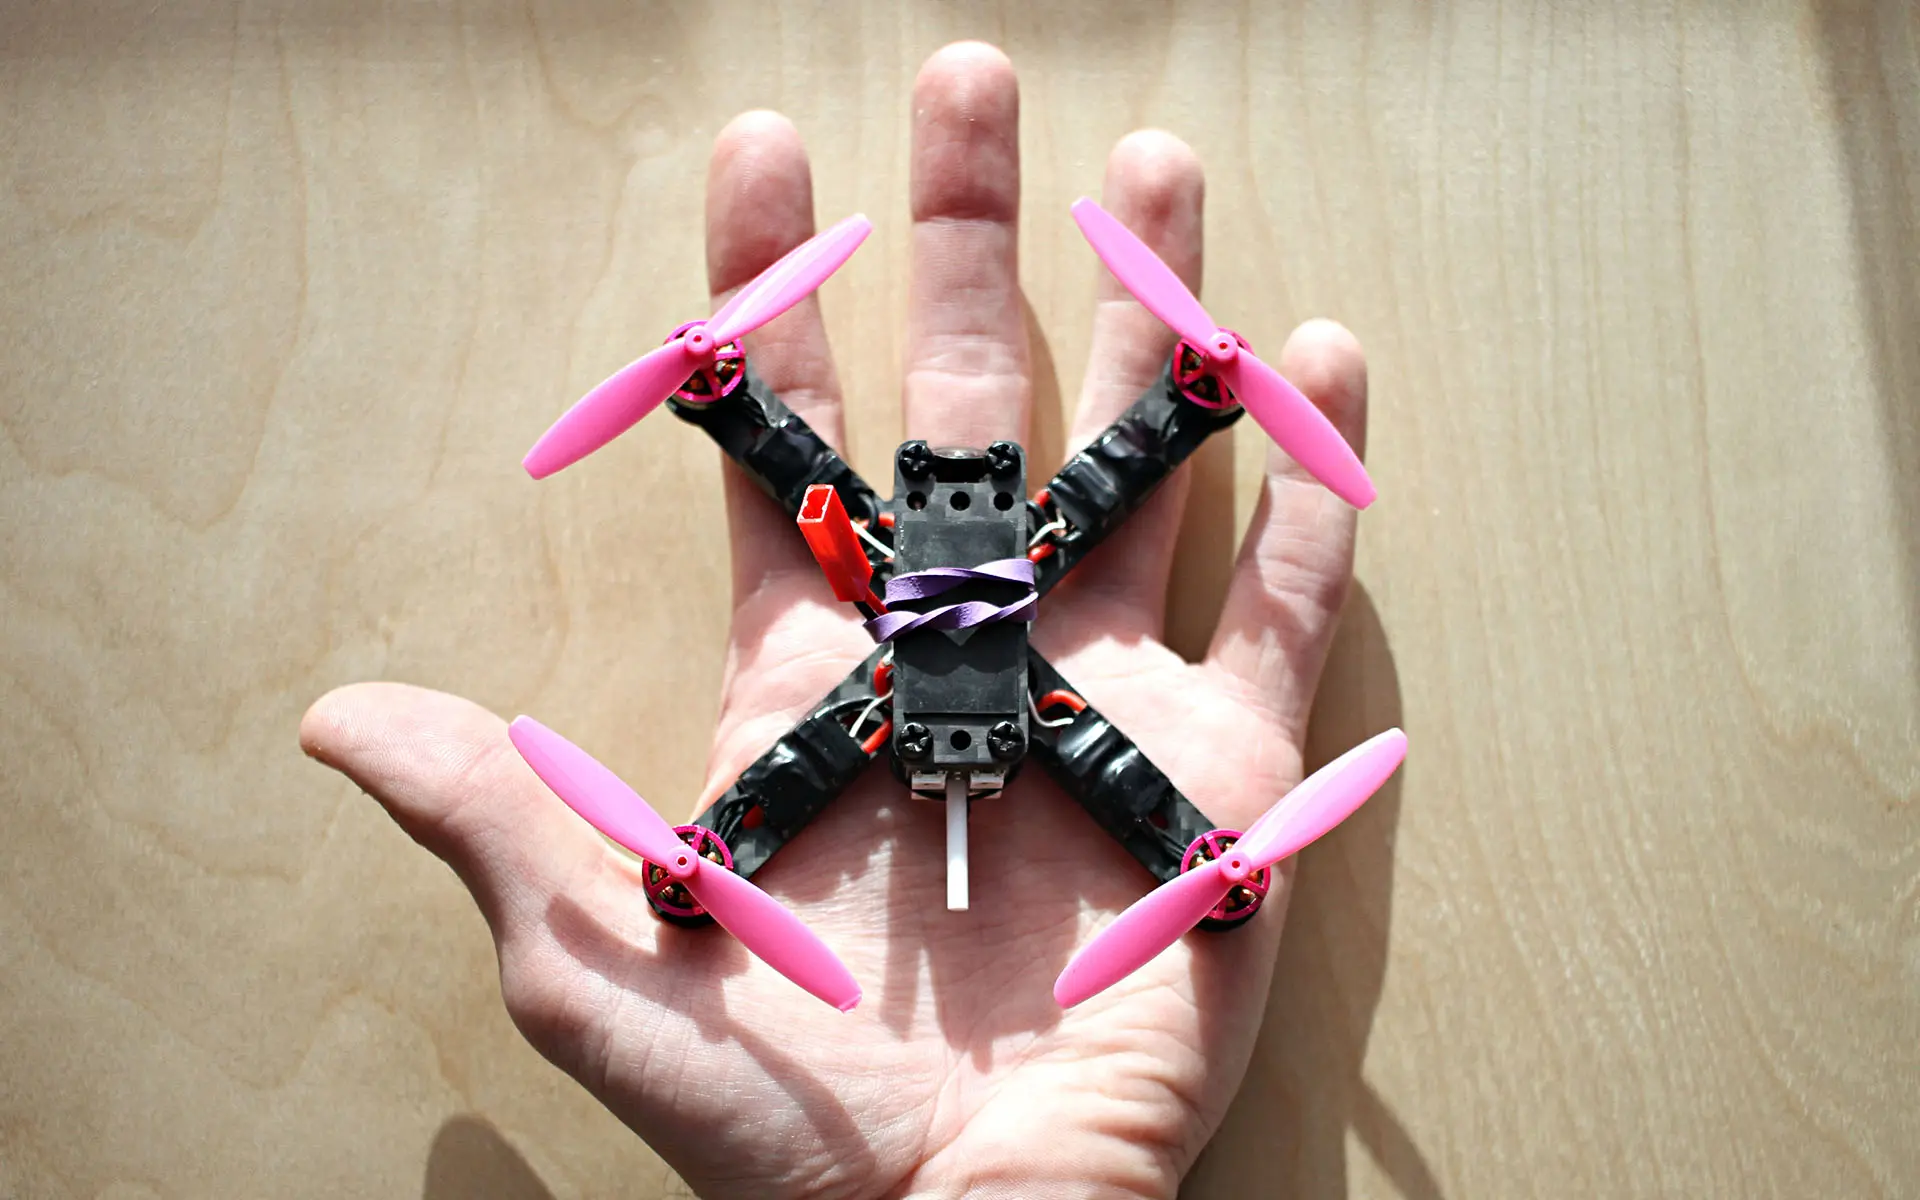 Top down view of a 2.5" drone in the palm of a hand.